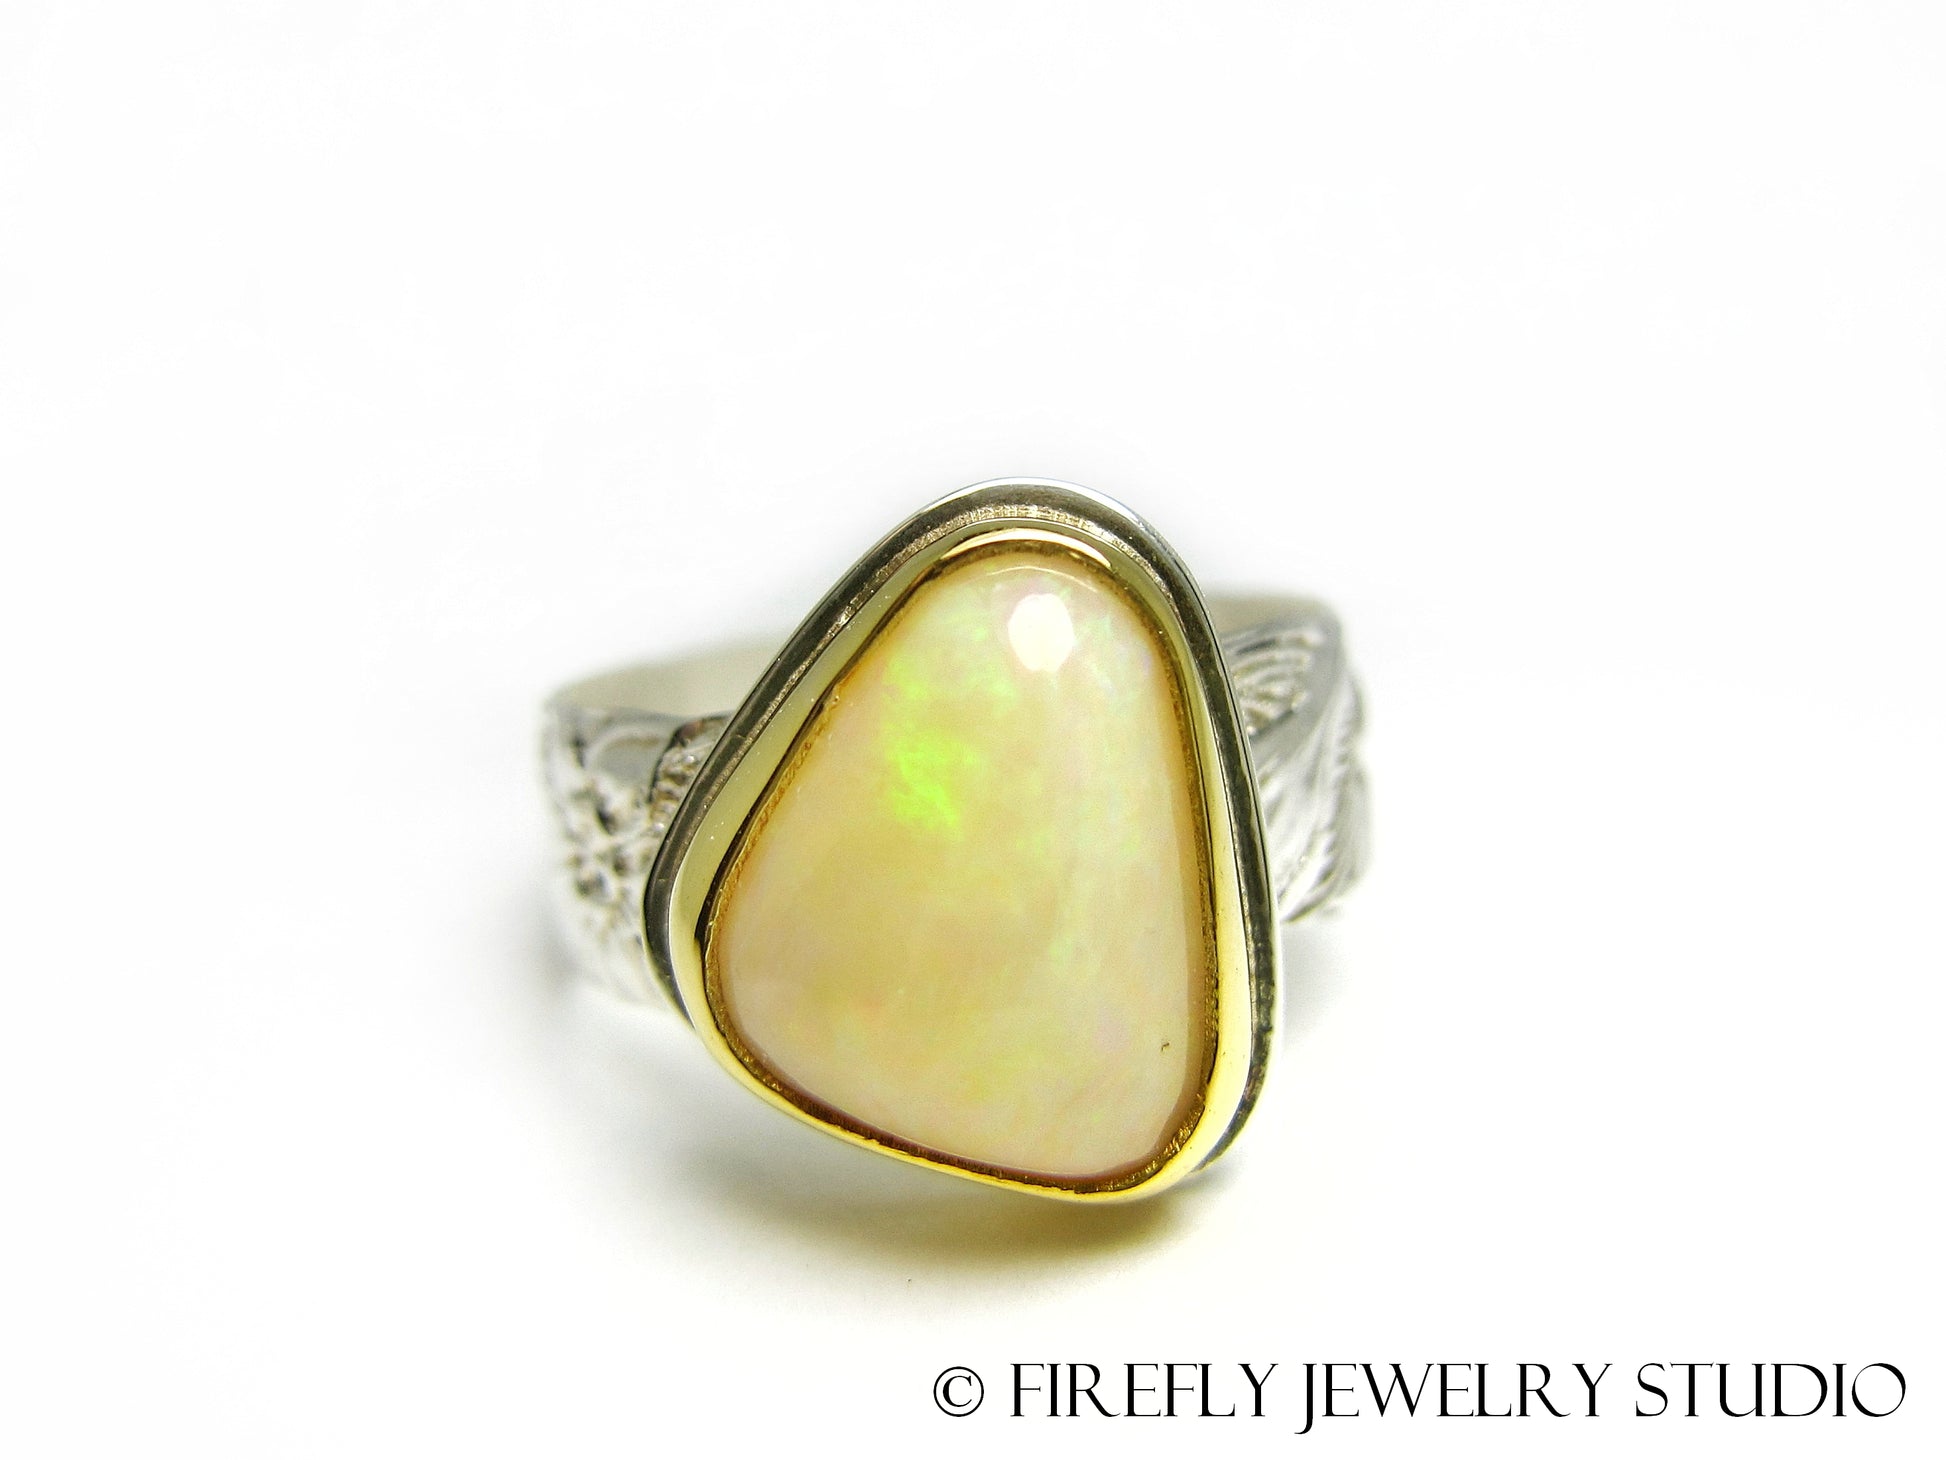 White Australian Opal Ring in 24k Gold and Sterling Silver with Lily Band. Size 7.25 - Firefly Jewelry Studio